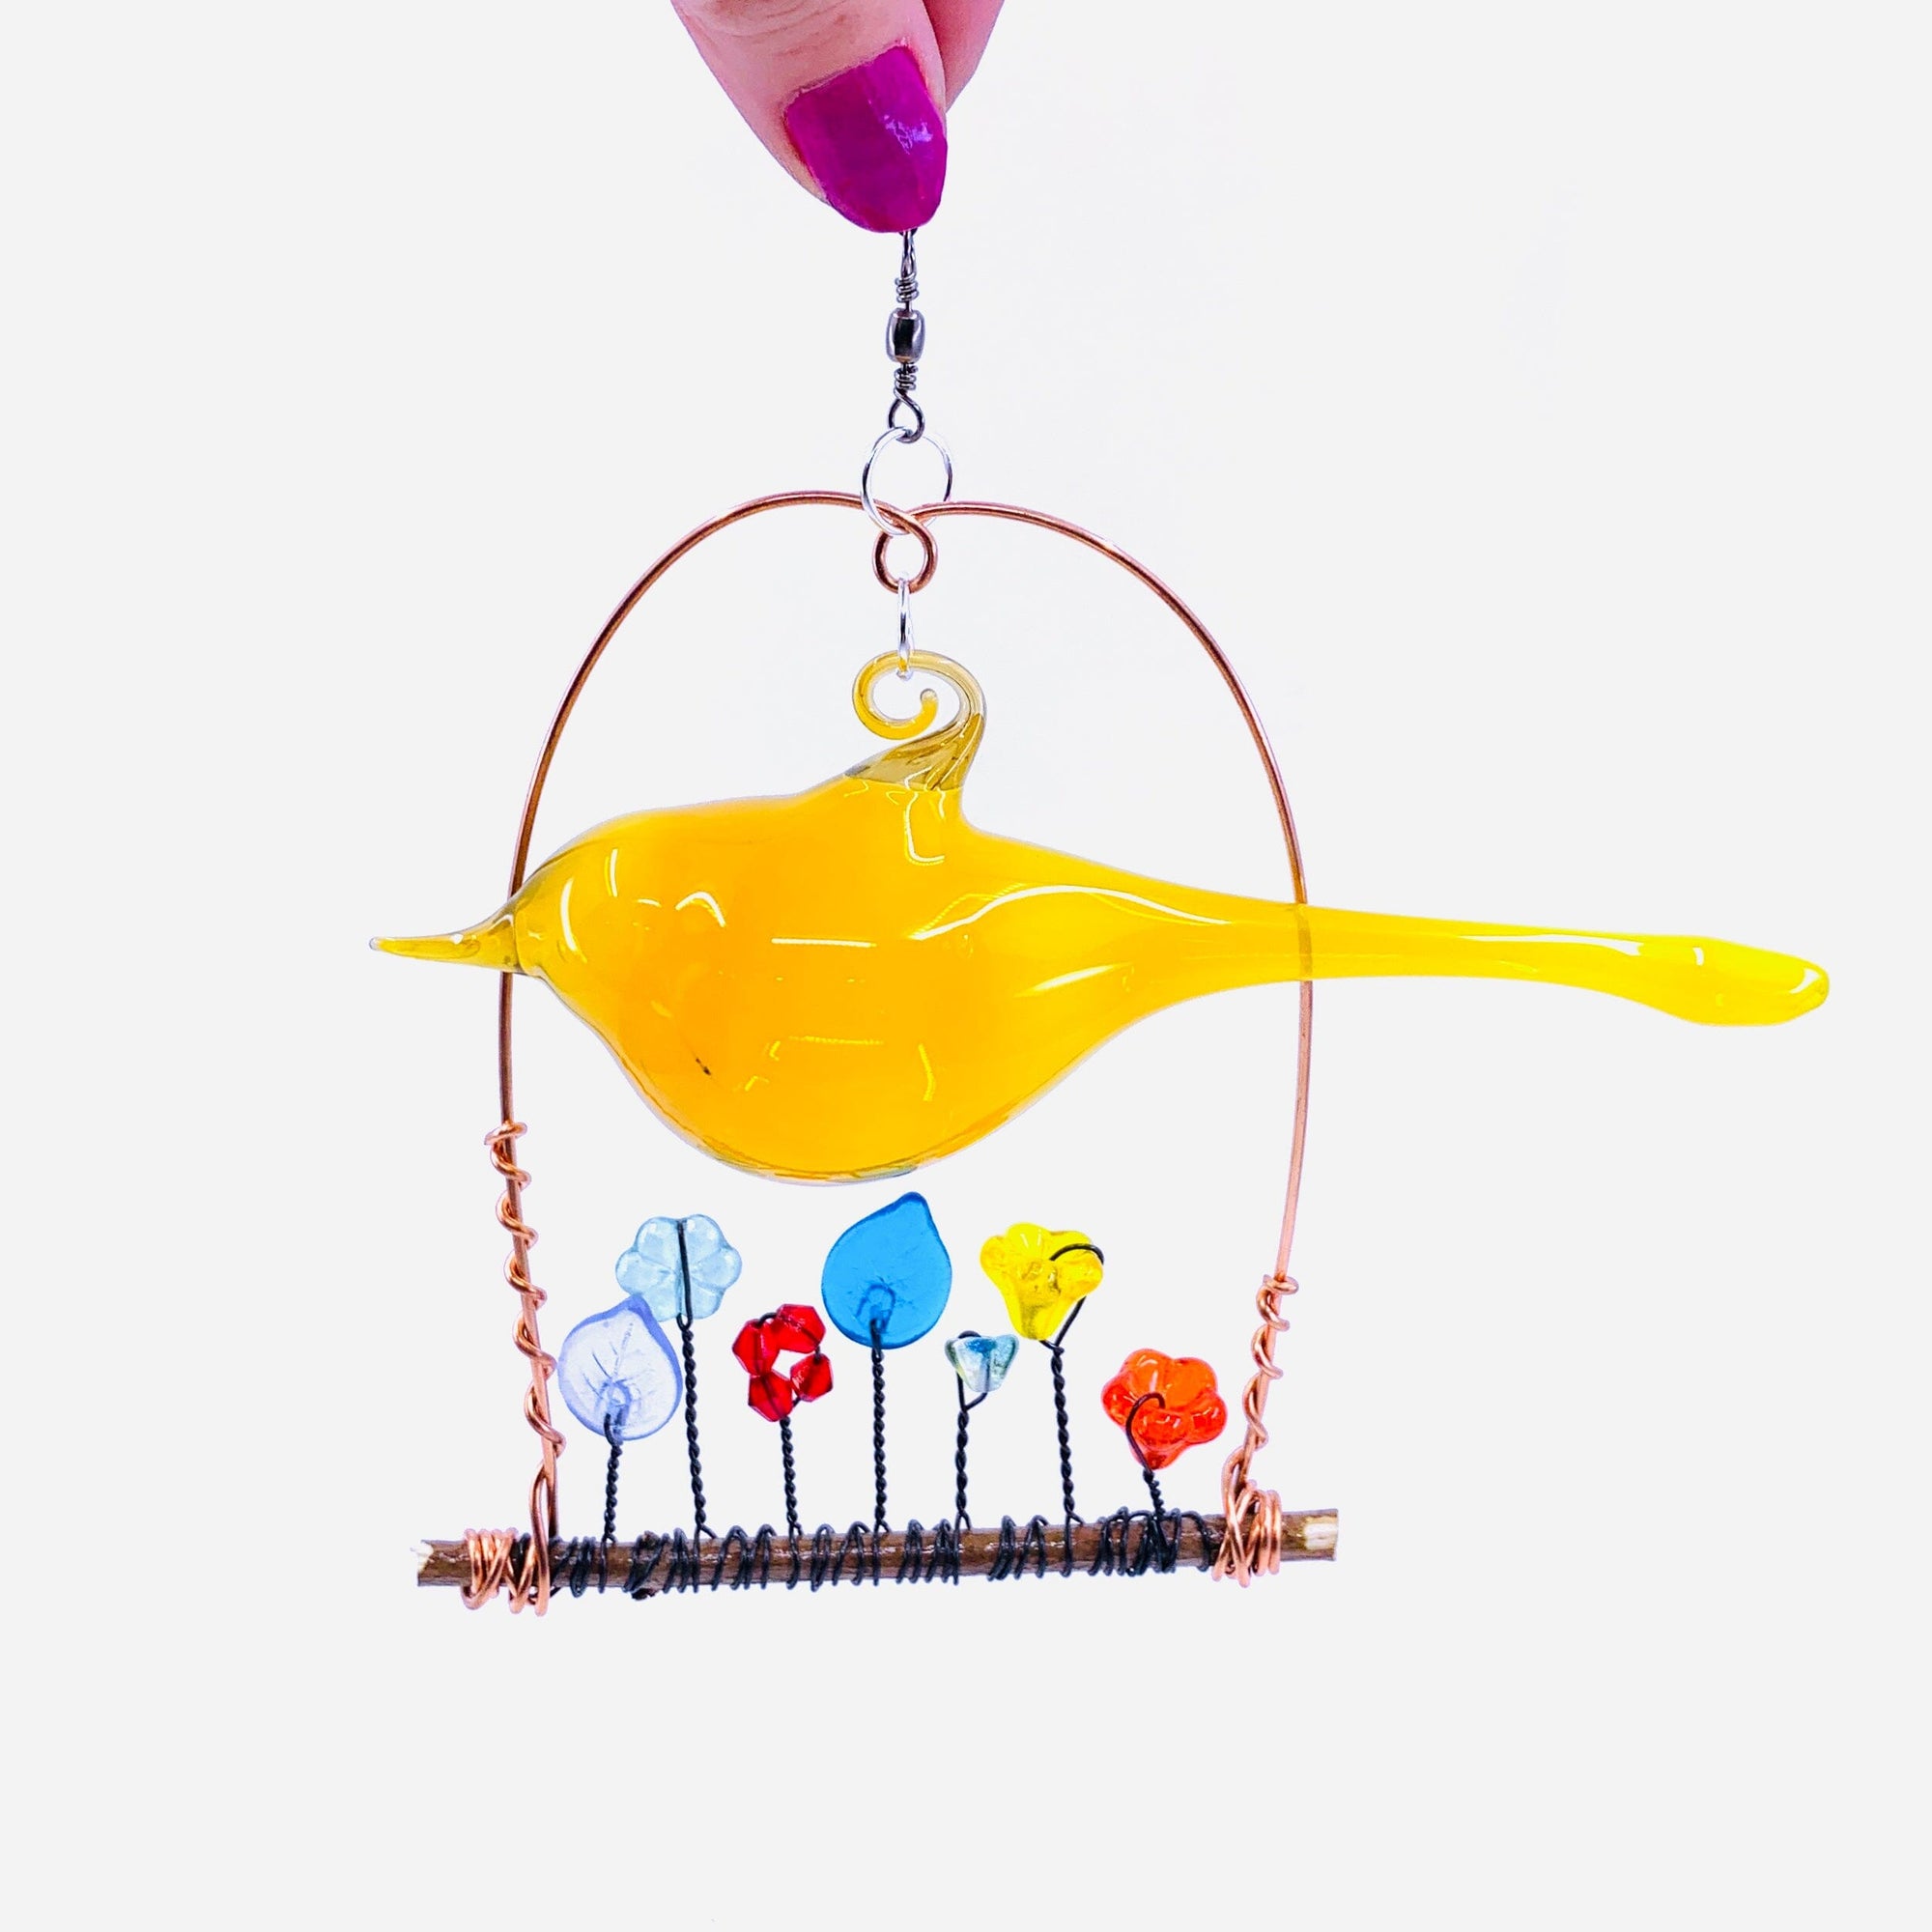 Hand Blown Glass Bird Wired Flower Garden Swing 3, Yellow Decor Whimsical Wire and Glass 